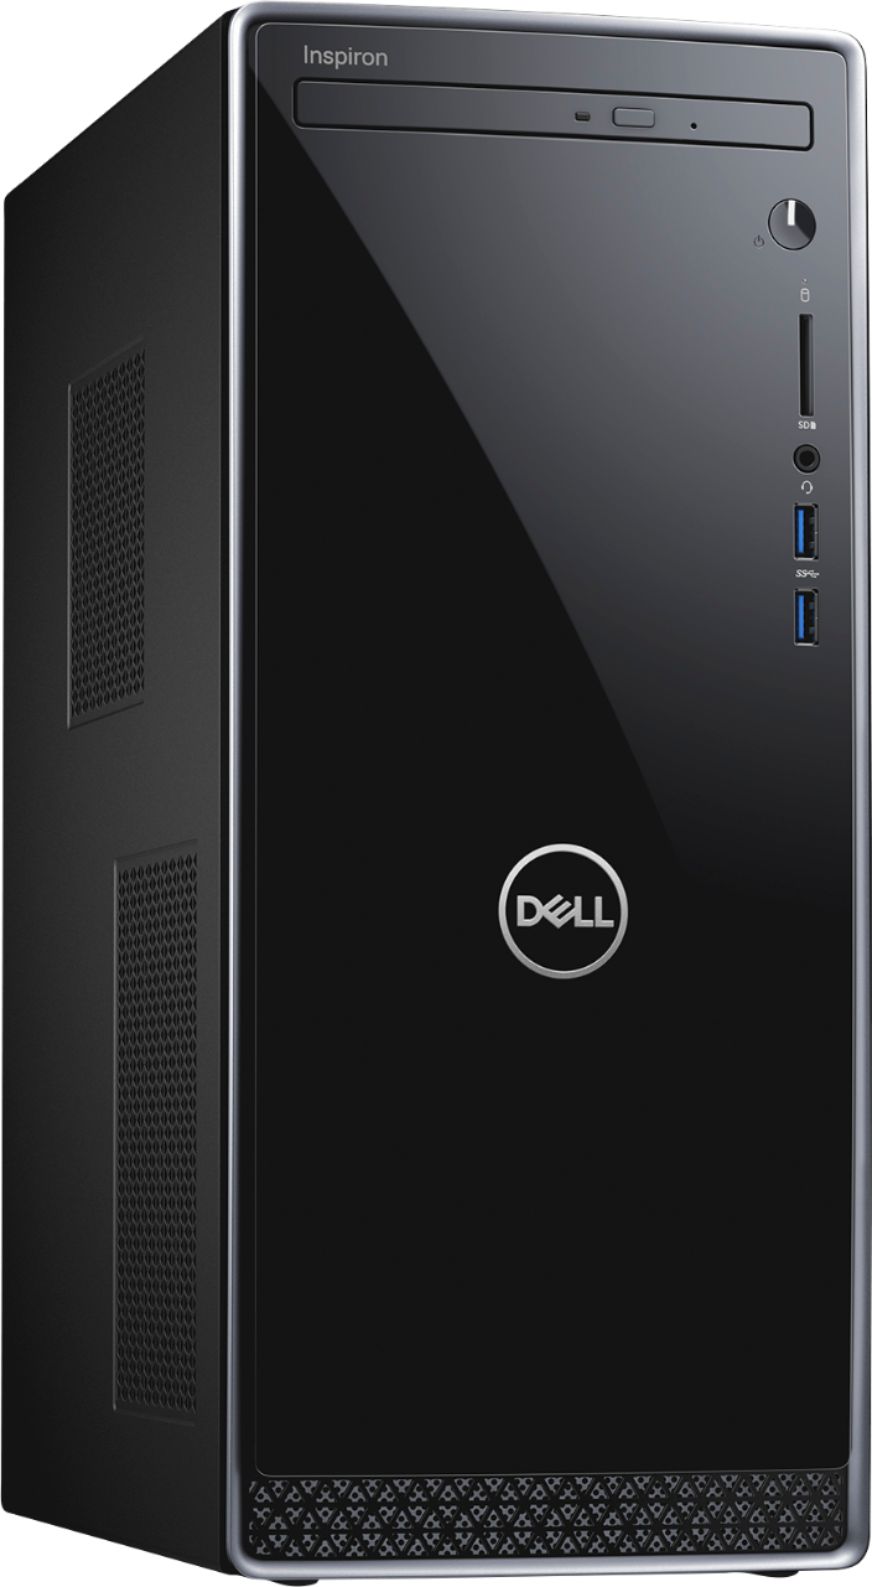 Dell Inspiron Desktop Intel Core i7 12GB Memory 256GB Solid State Drive  Black With Silver Trim I3670-7905BLK-PUS - Best Buy